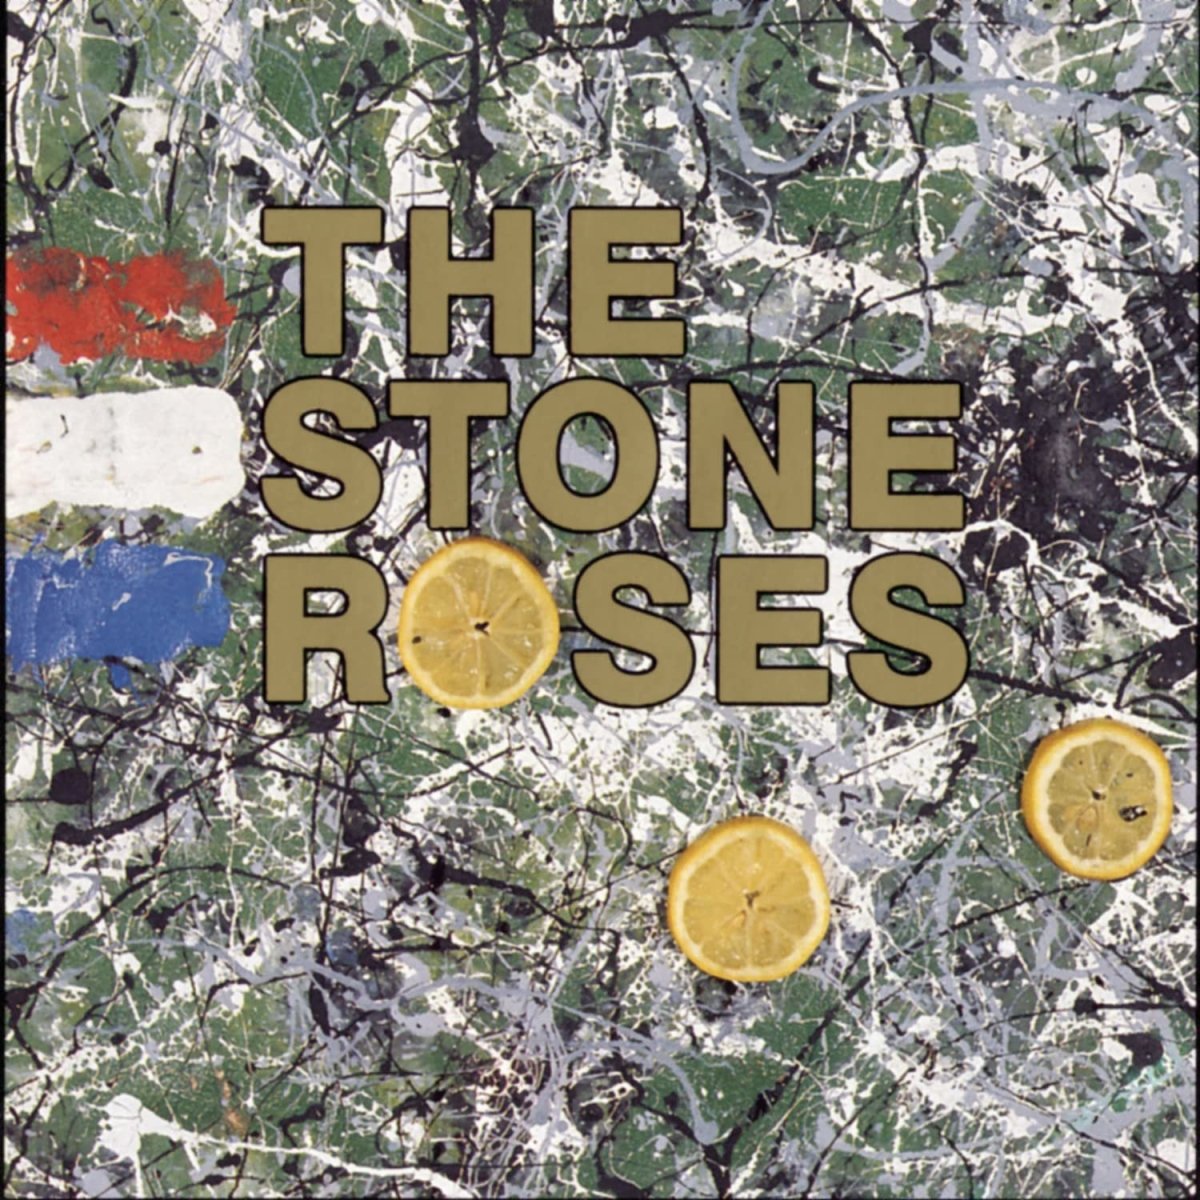 The Stone Roses - The Stone Roses Records & LPs Vinyl